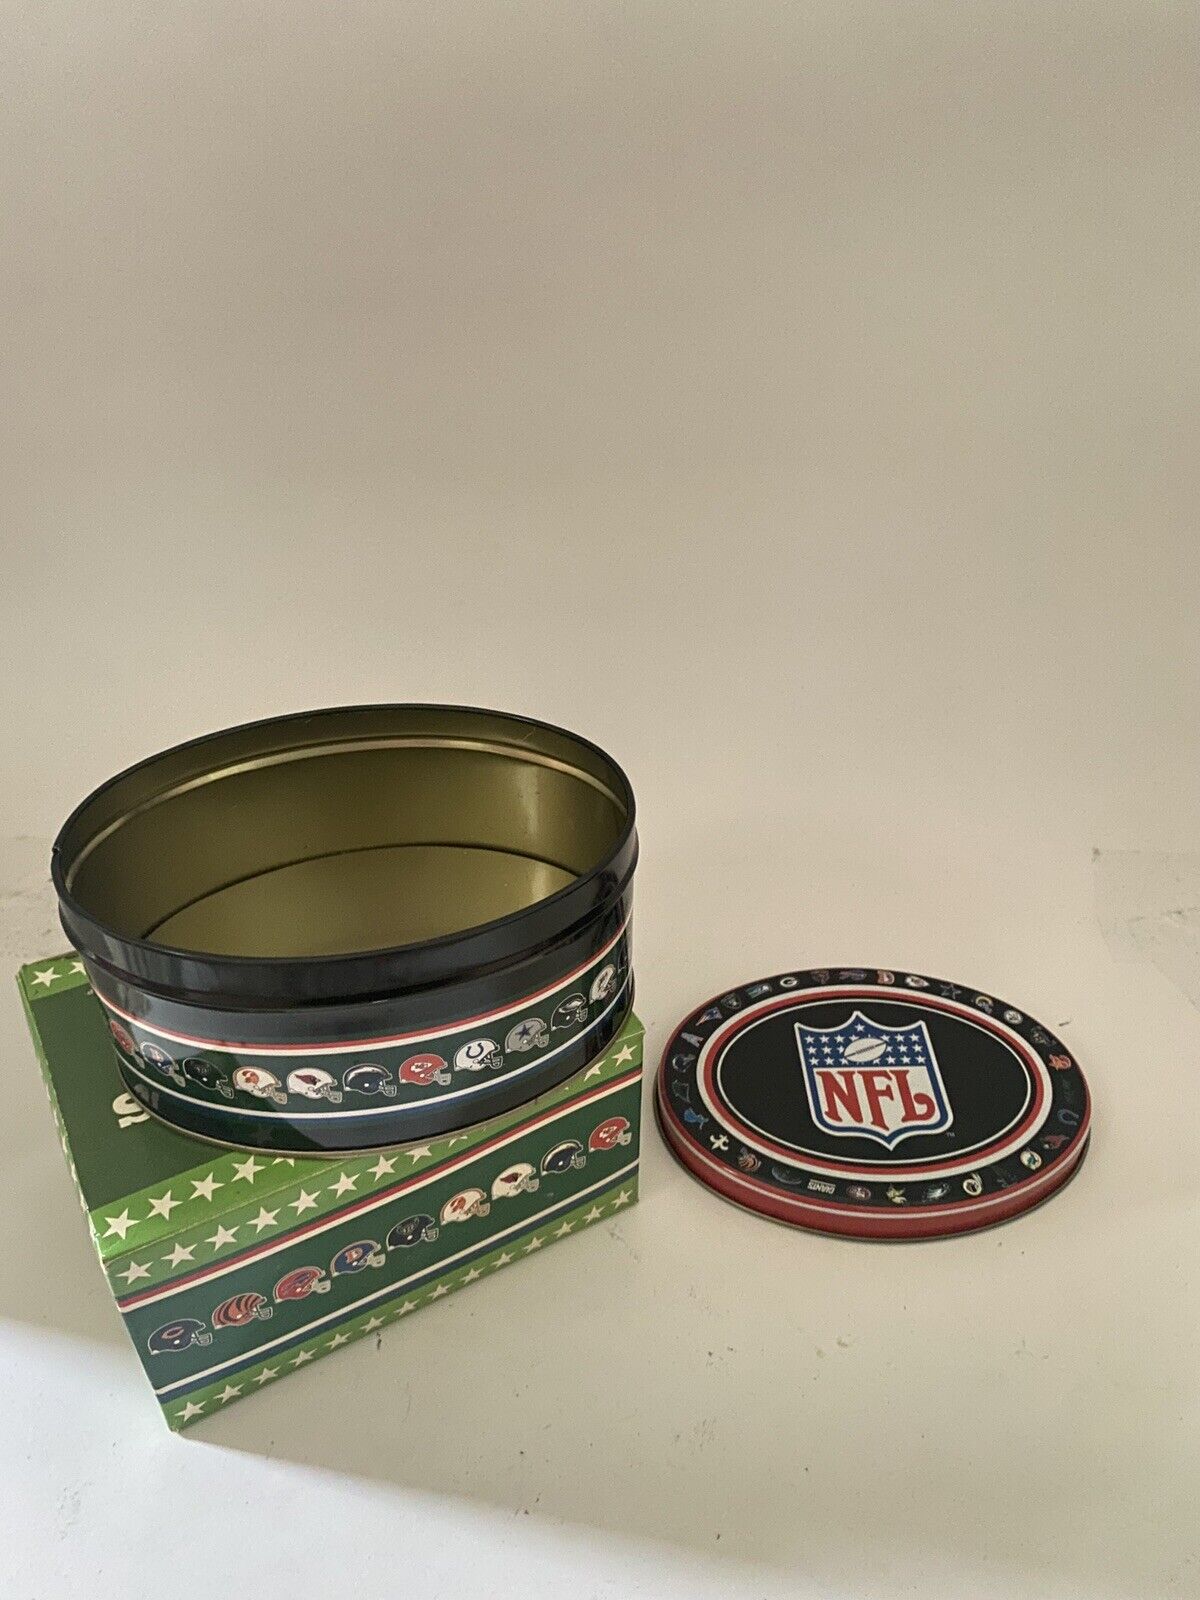 NFL gift co vintage 1997 collectors tin